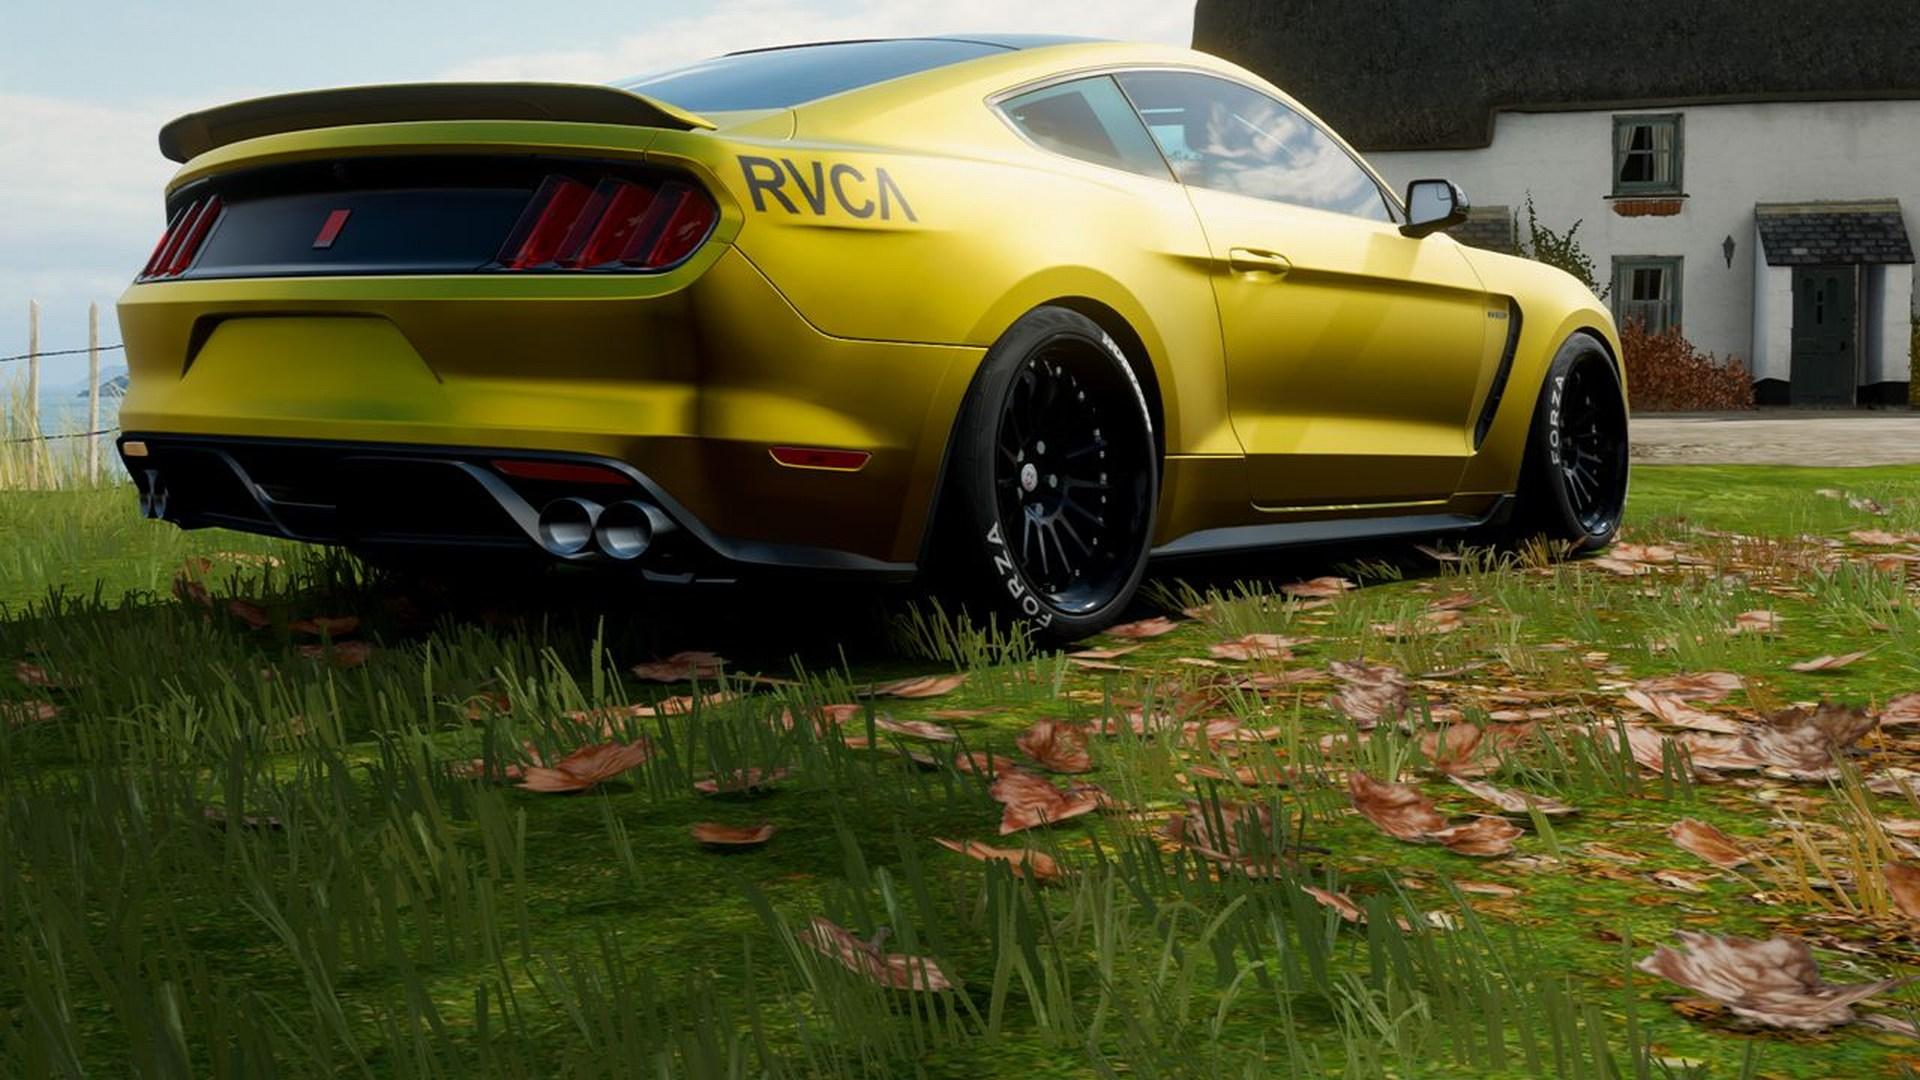 HD wallpaper, Car, Ford Mustang S550, Ford Mustang, Rvca, Forza, Game Cg